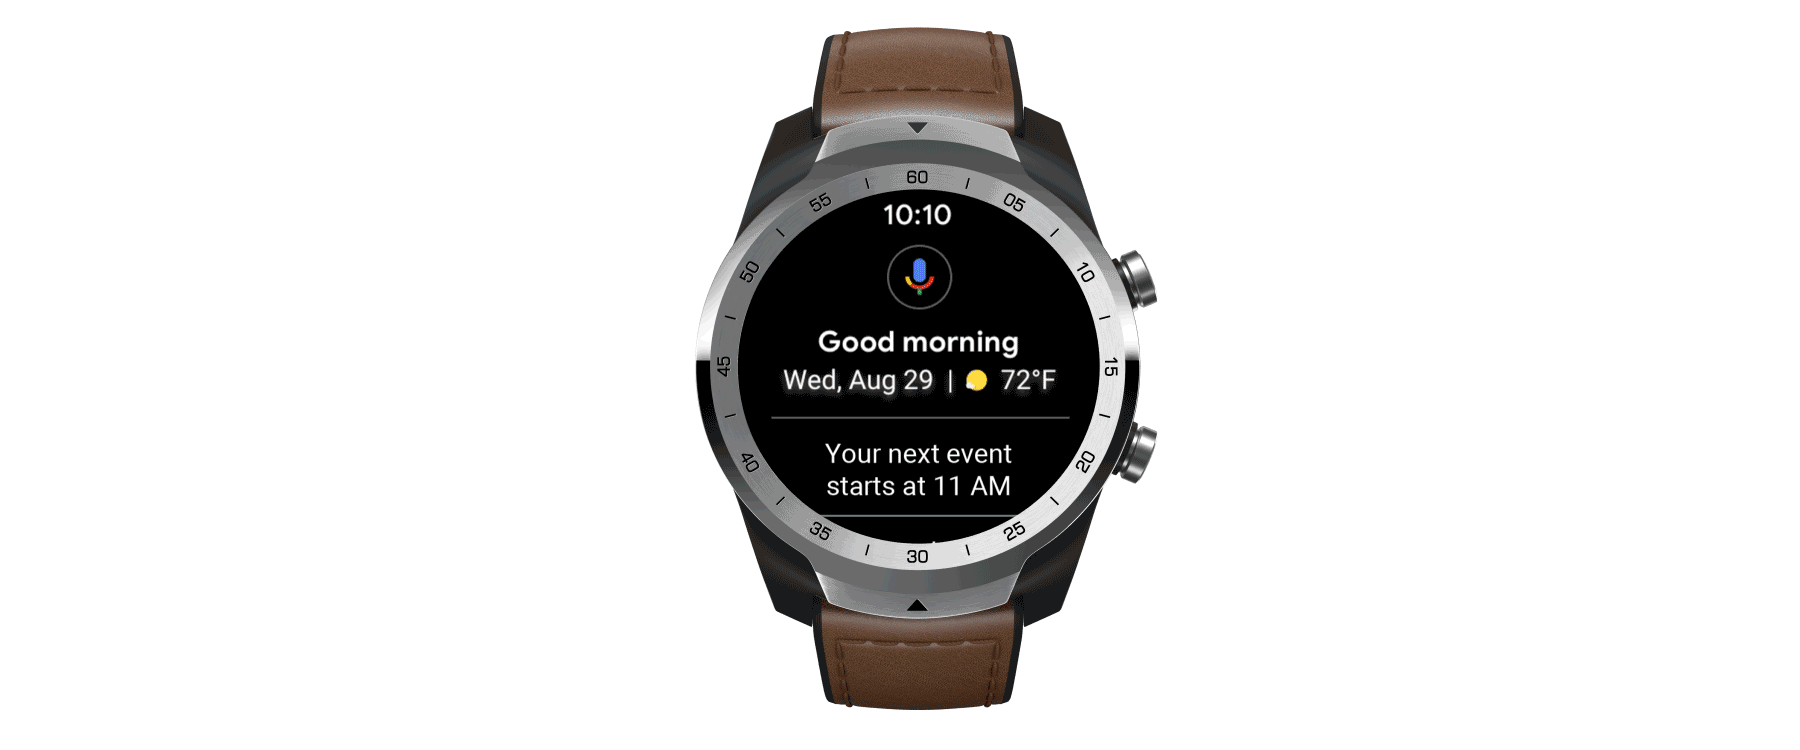 Wear OS to get new experience